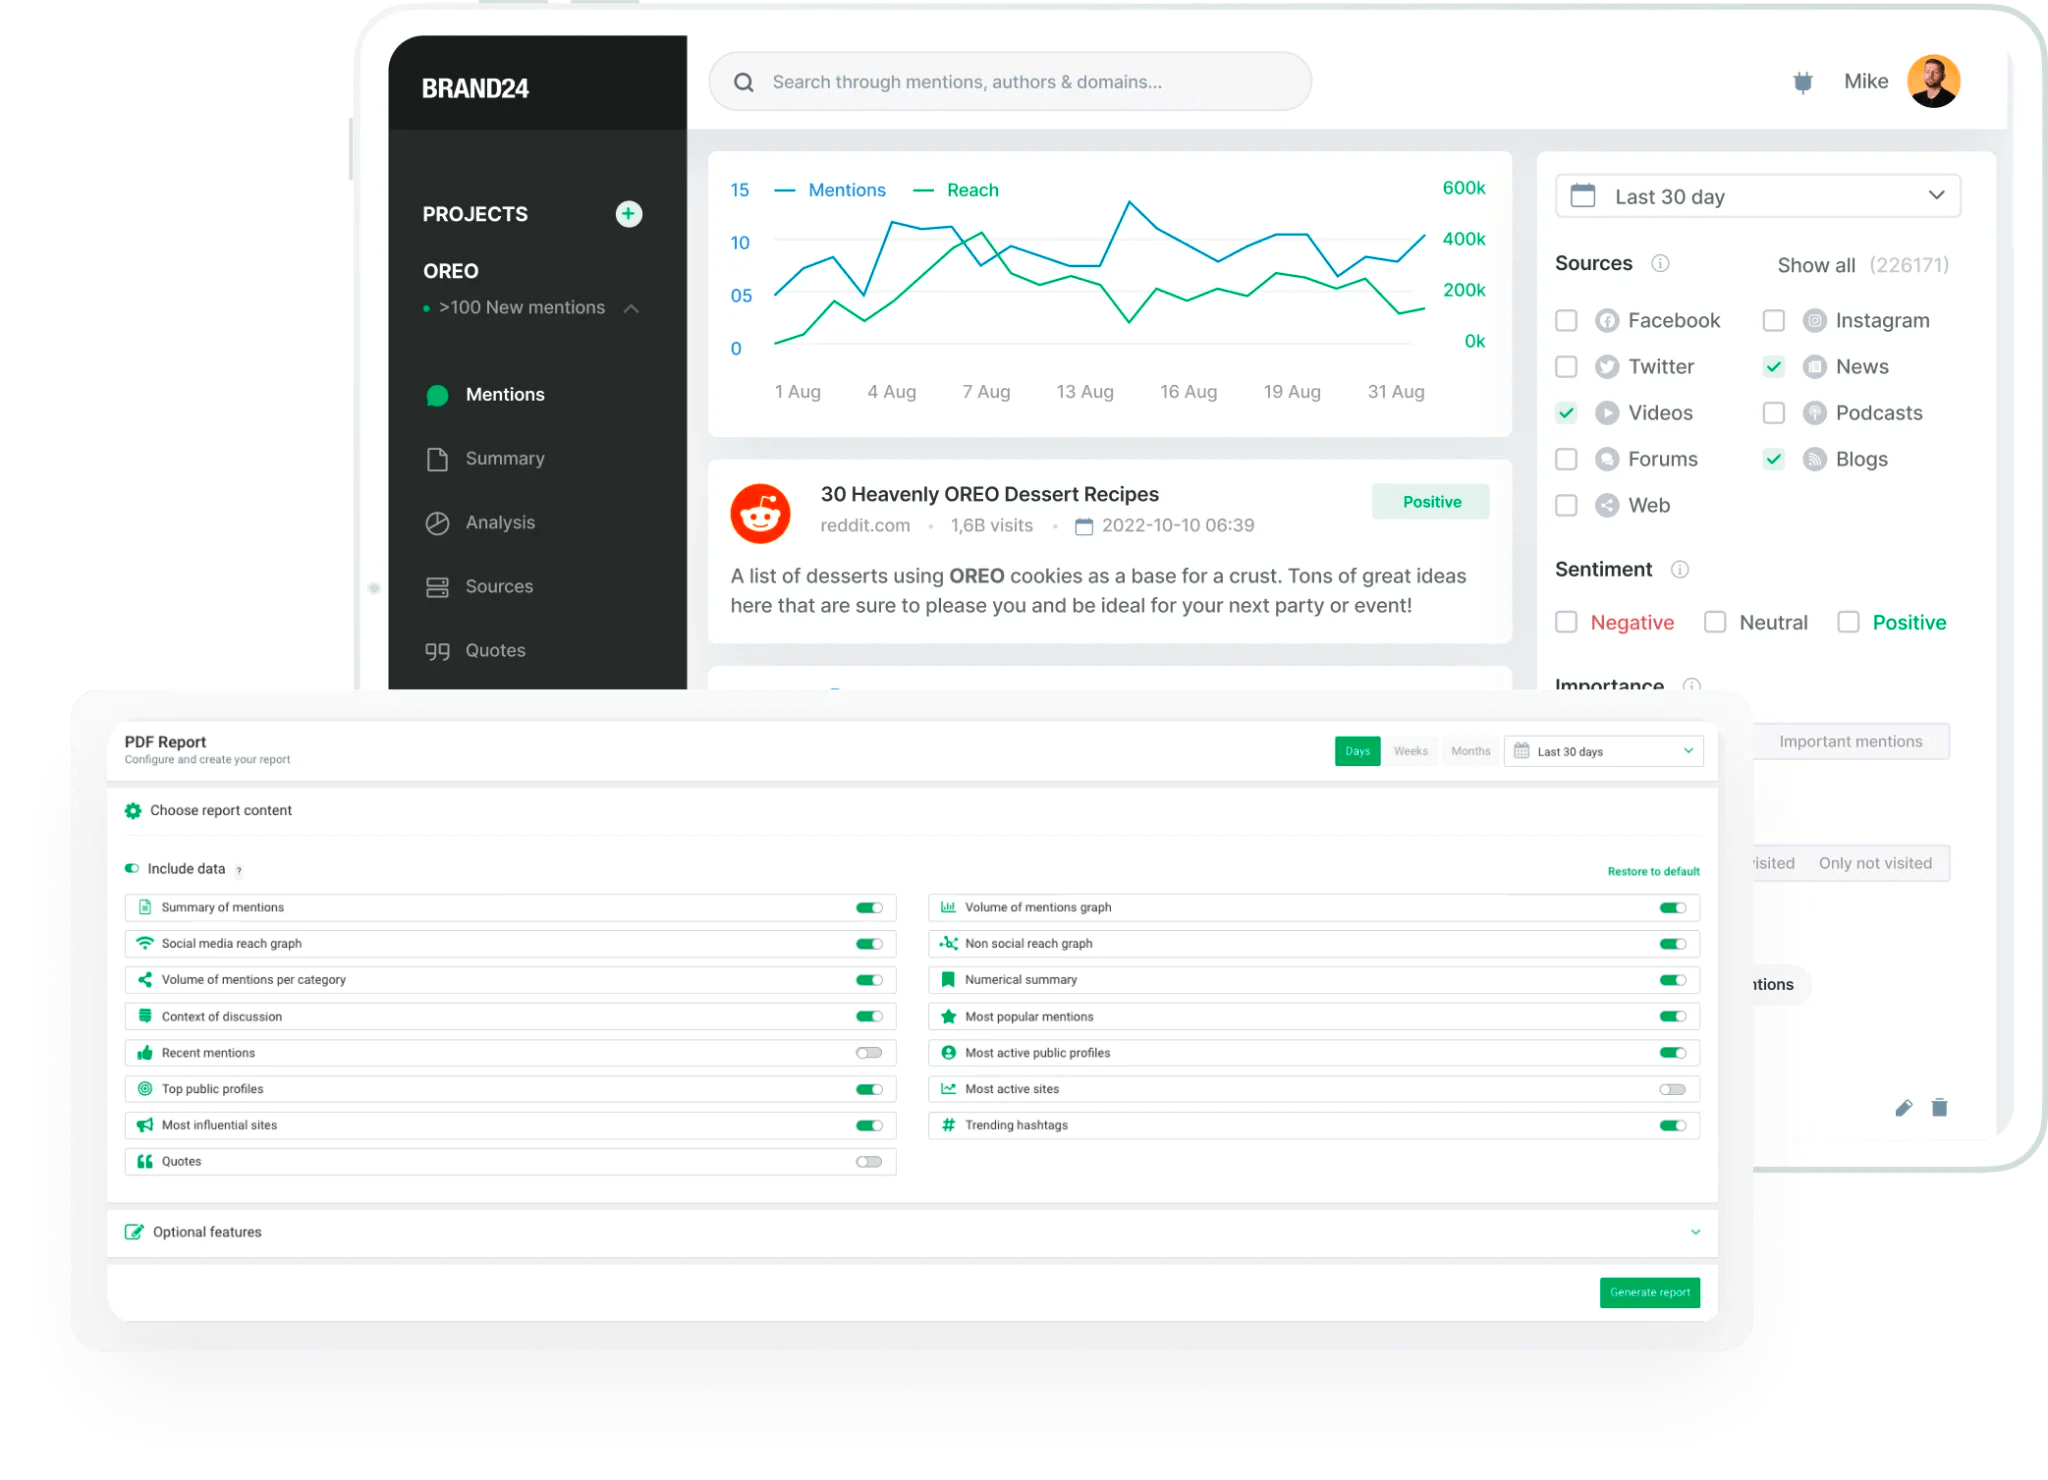 Brand24 dashboard showcasing Facebook analytics with metrics on mentions, sentiment analysis, and user engagement trends.